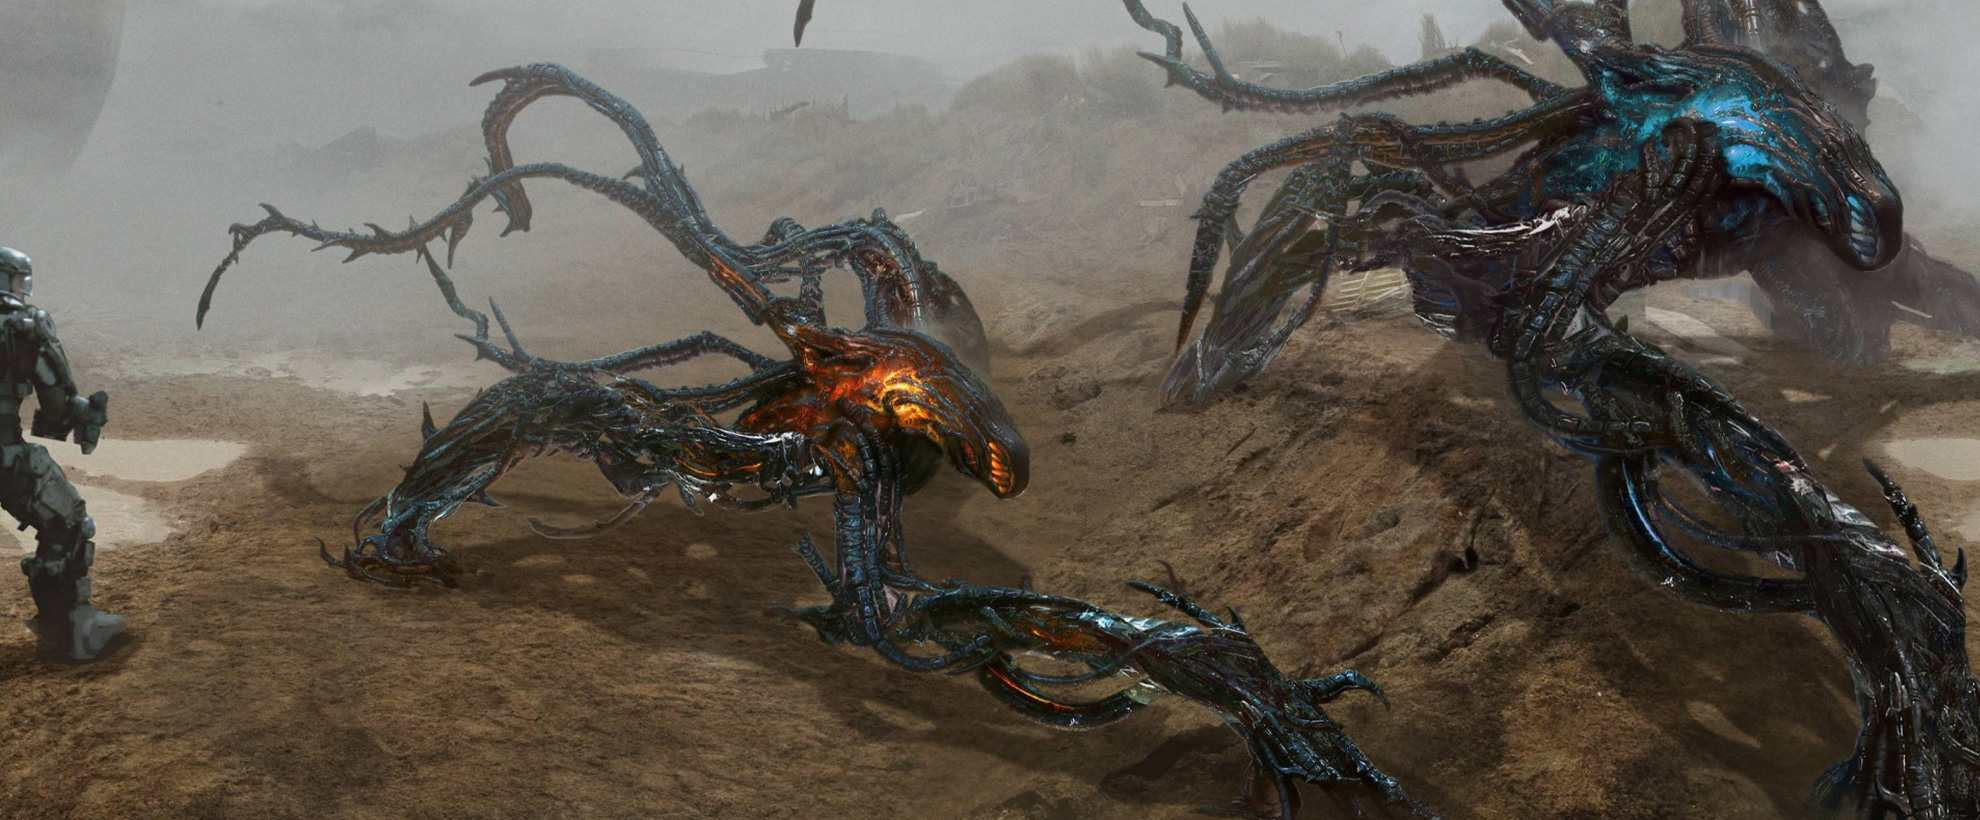 Concept Art of the aliens from Edge of Tomorrow